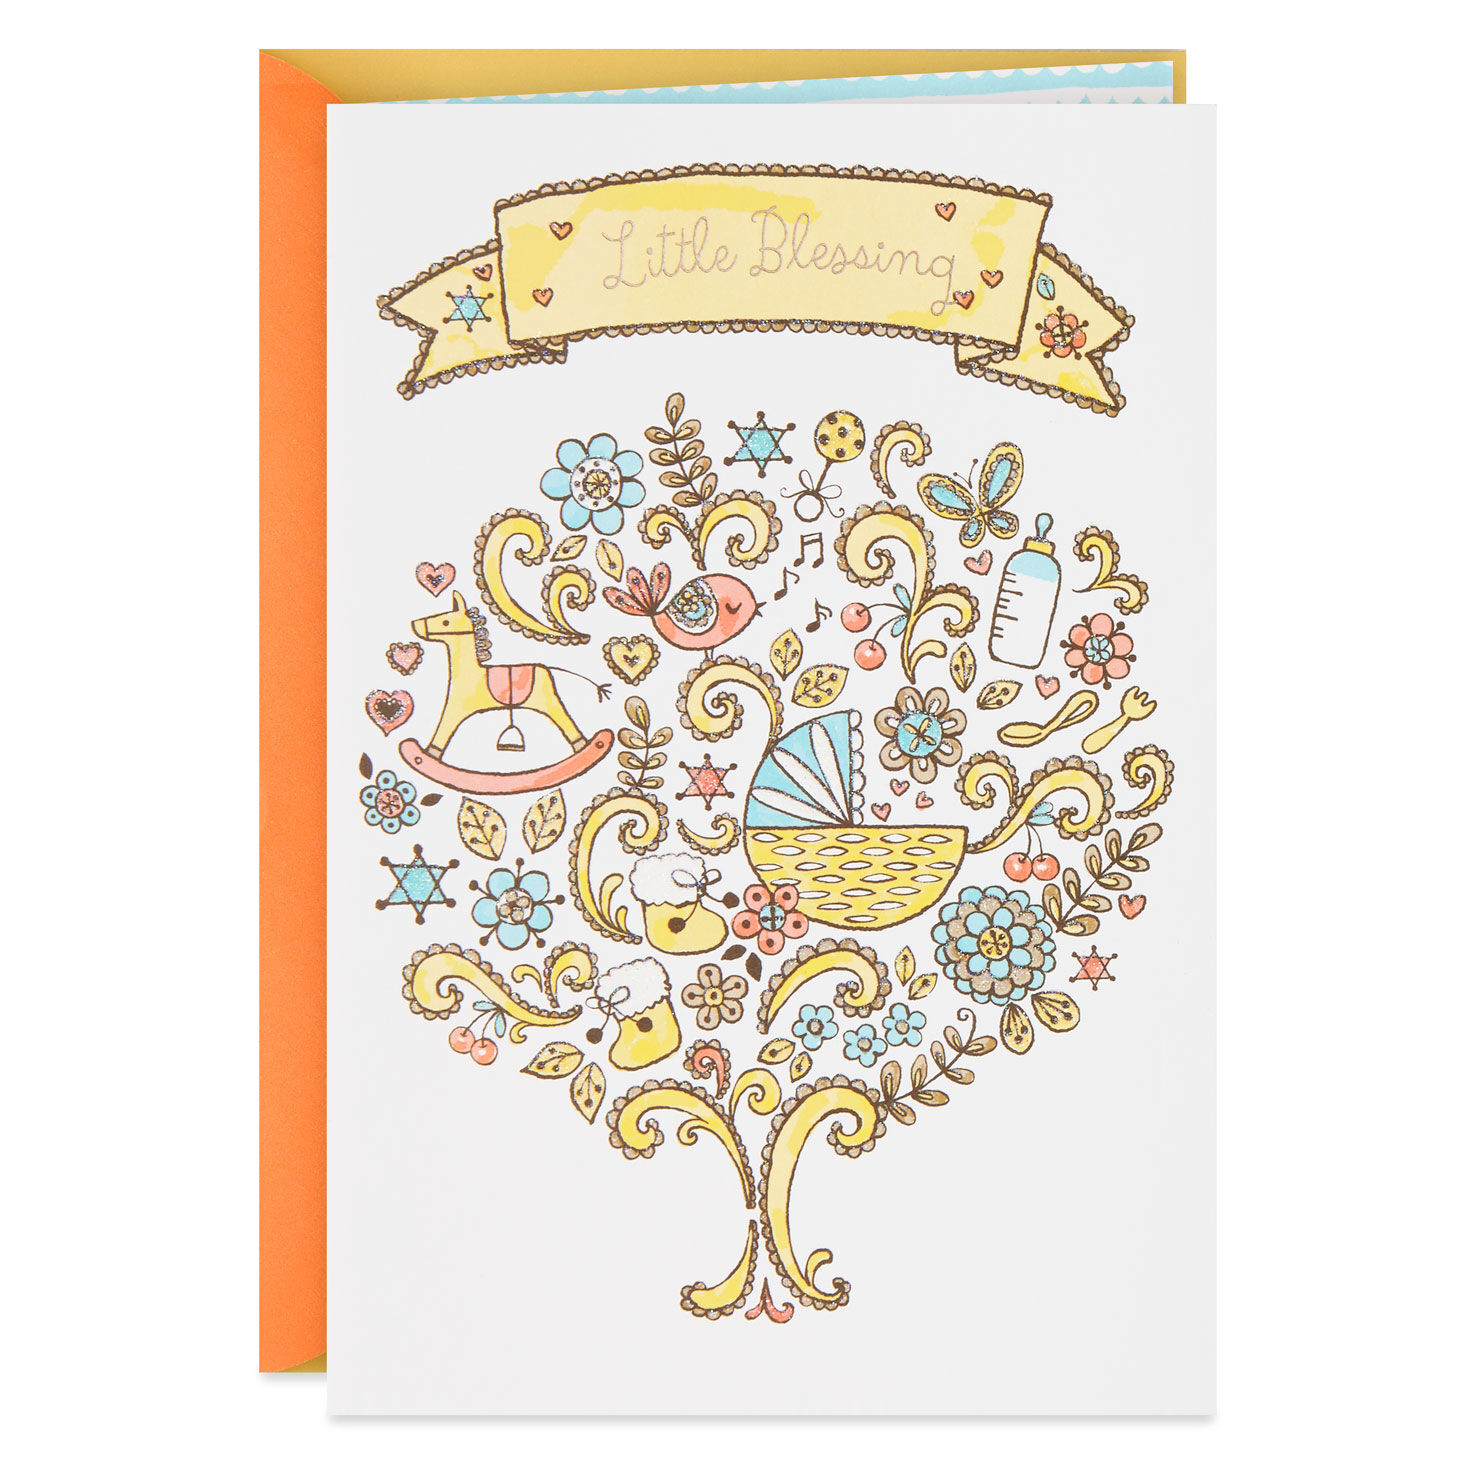 Mazel Tov on Your Little Blessing New Baby Card for only USD 3.99 | Hallmark